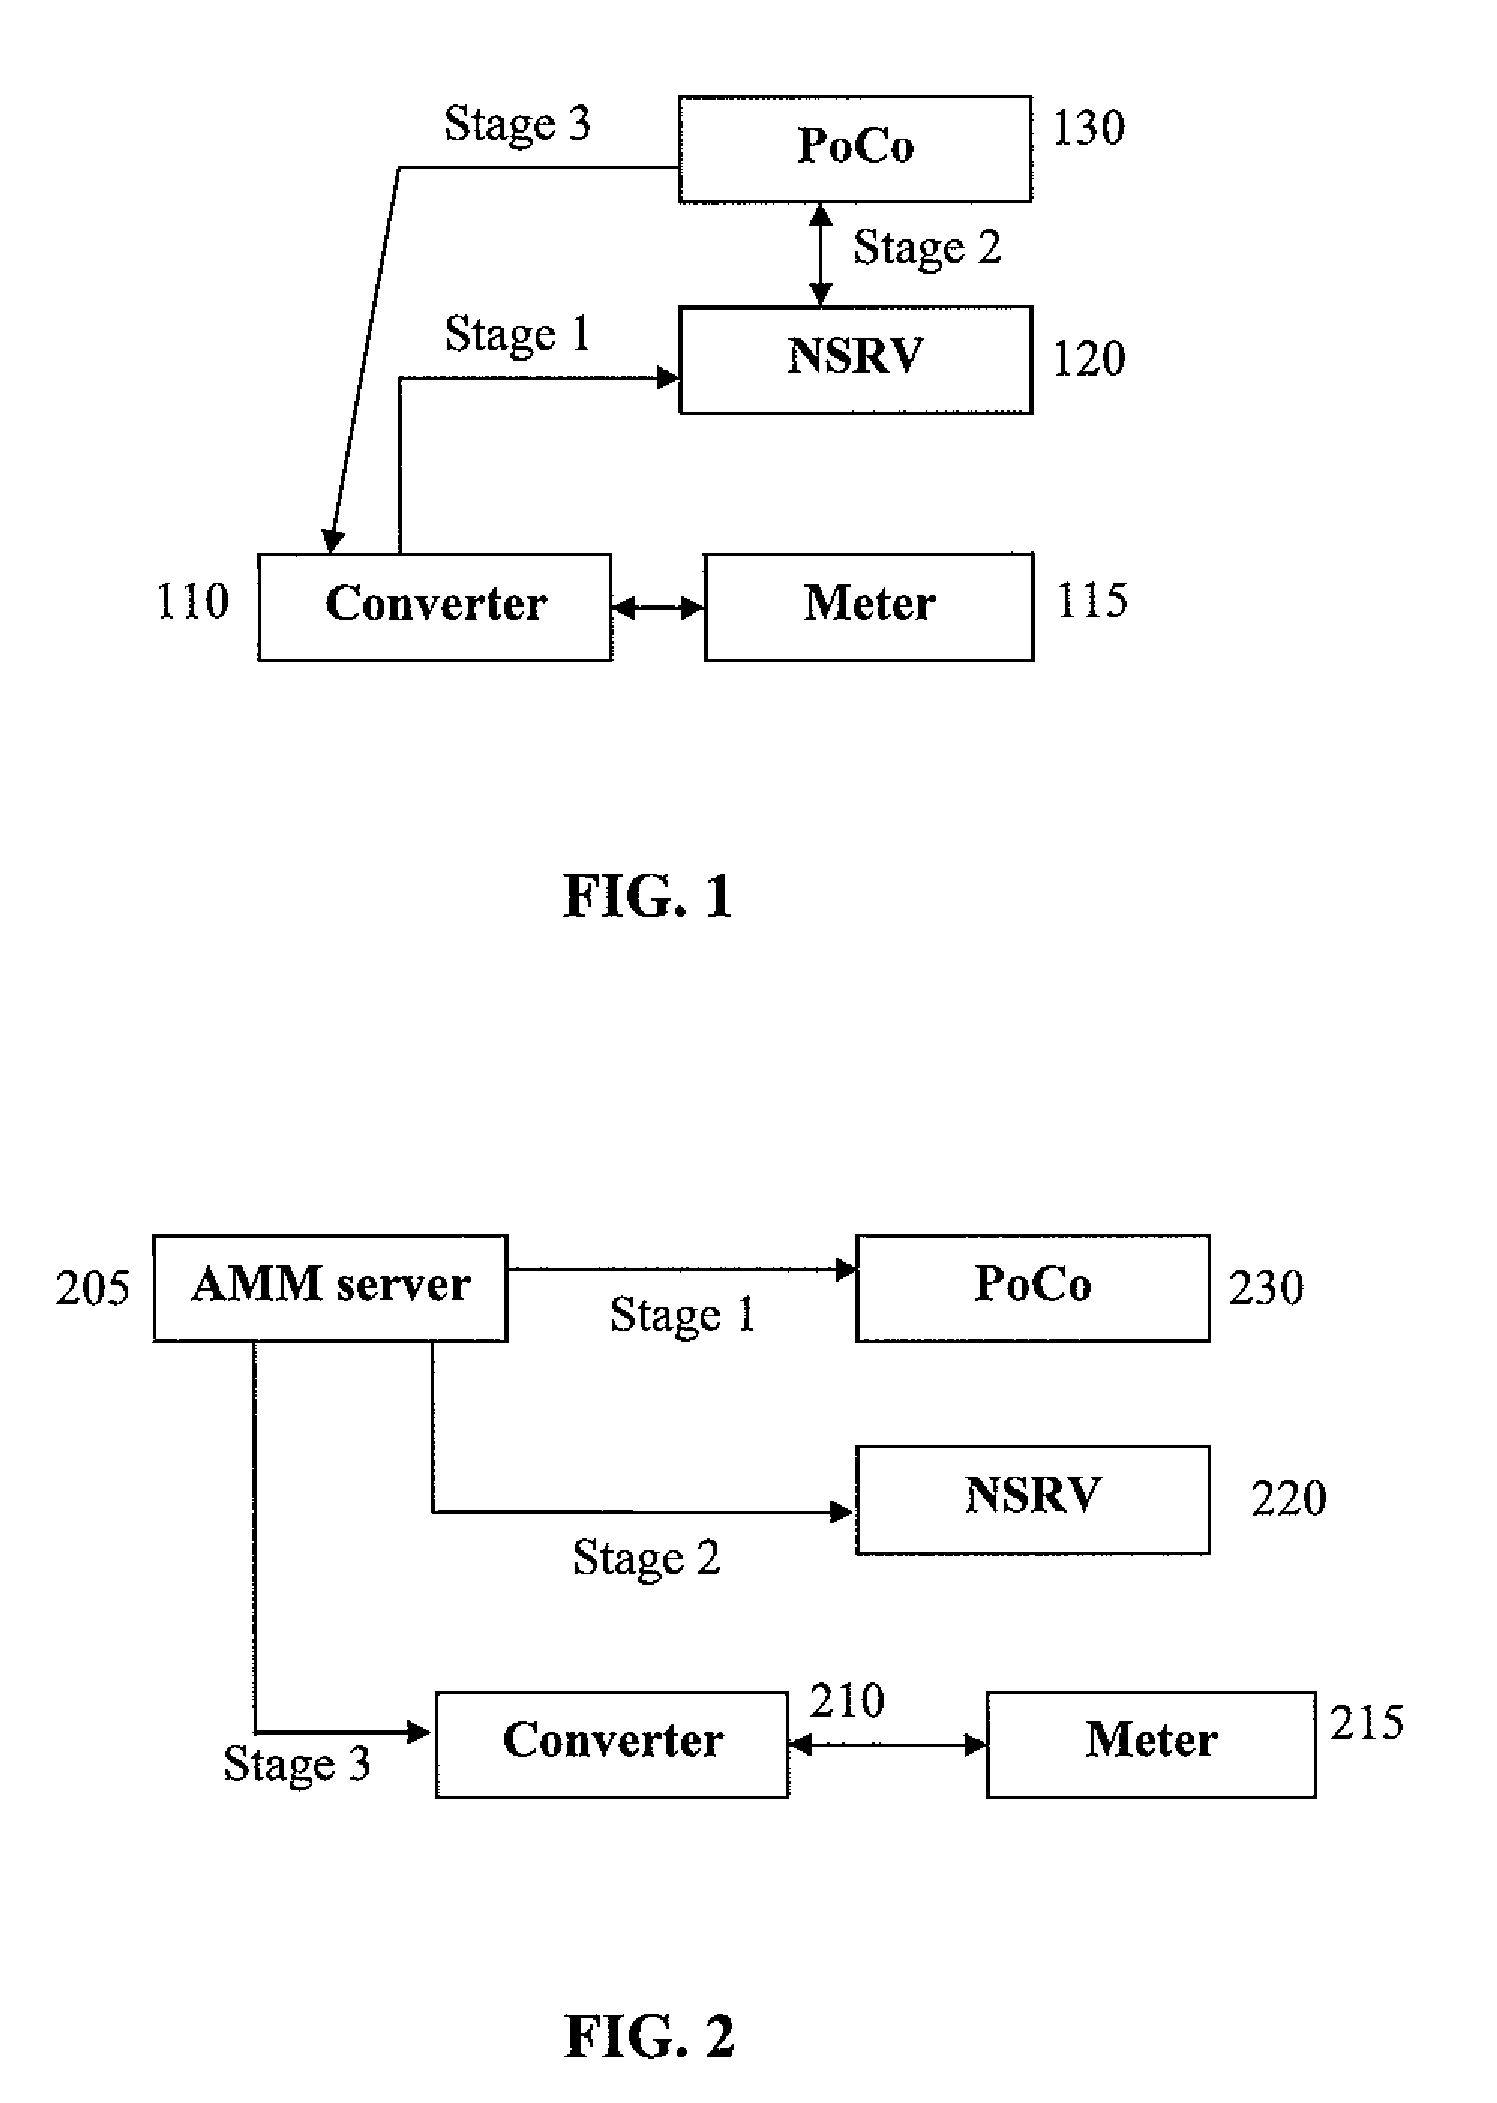 System and method for providing automated meter management layer intelligence to a power line communications system